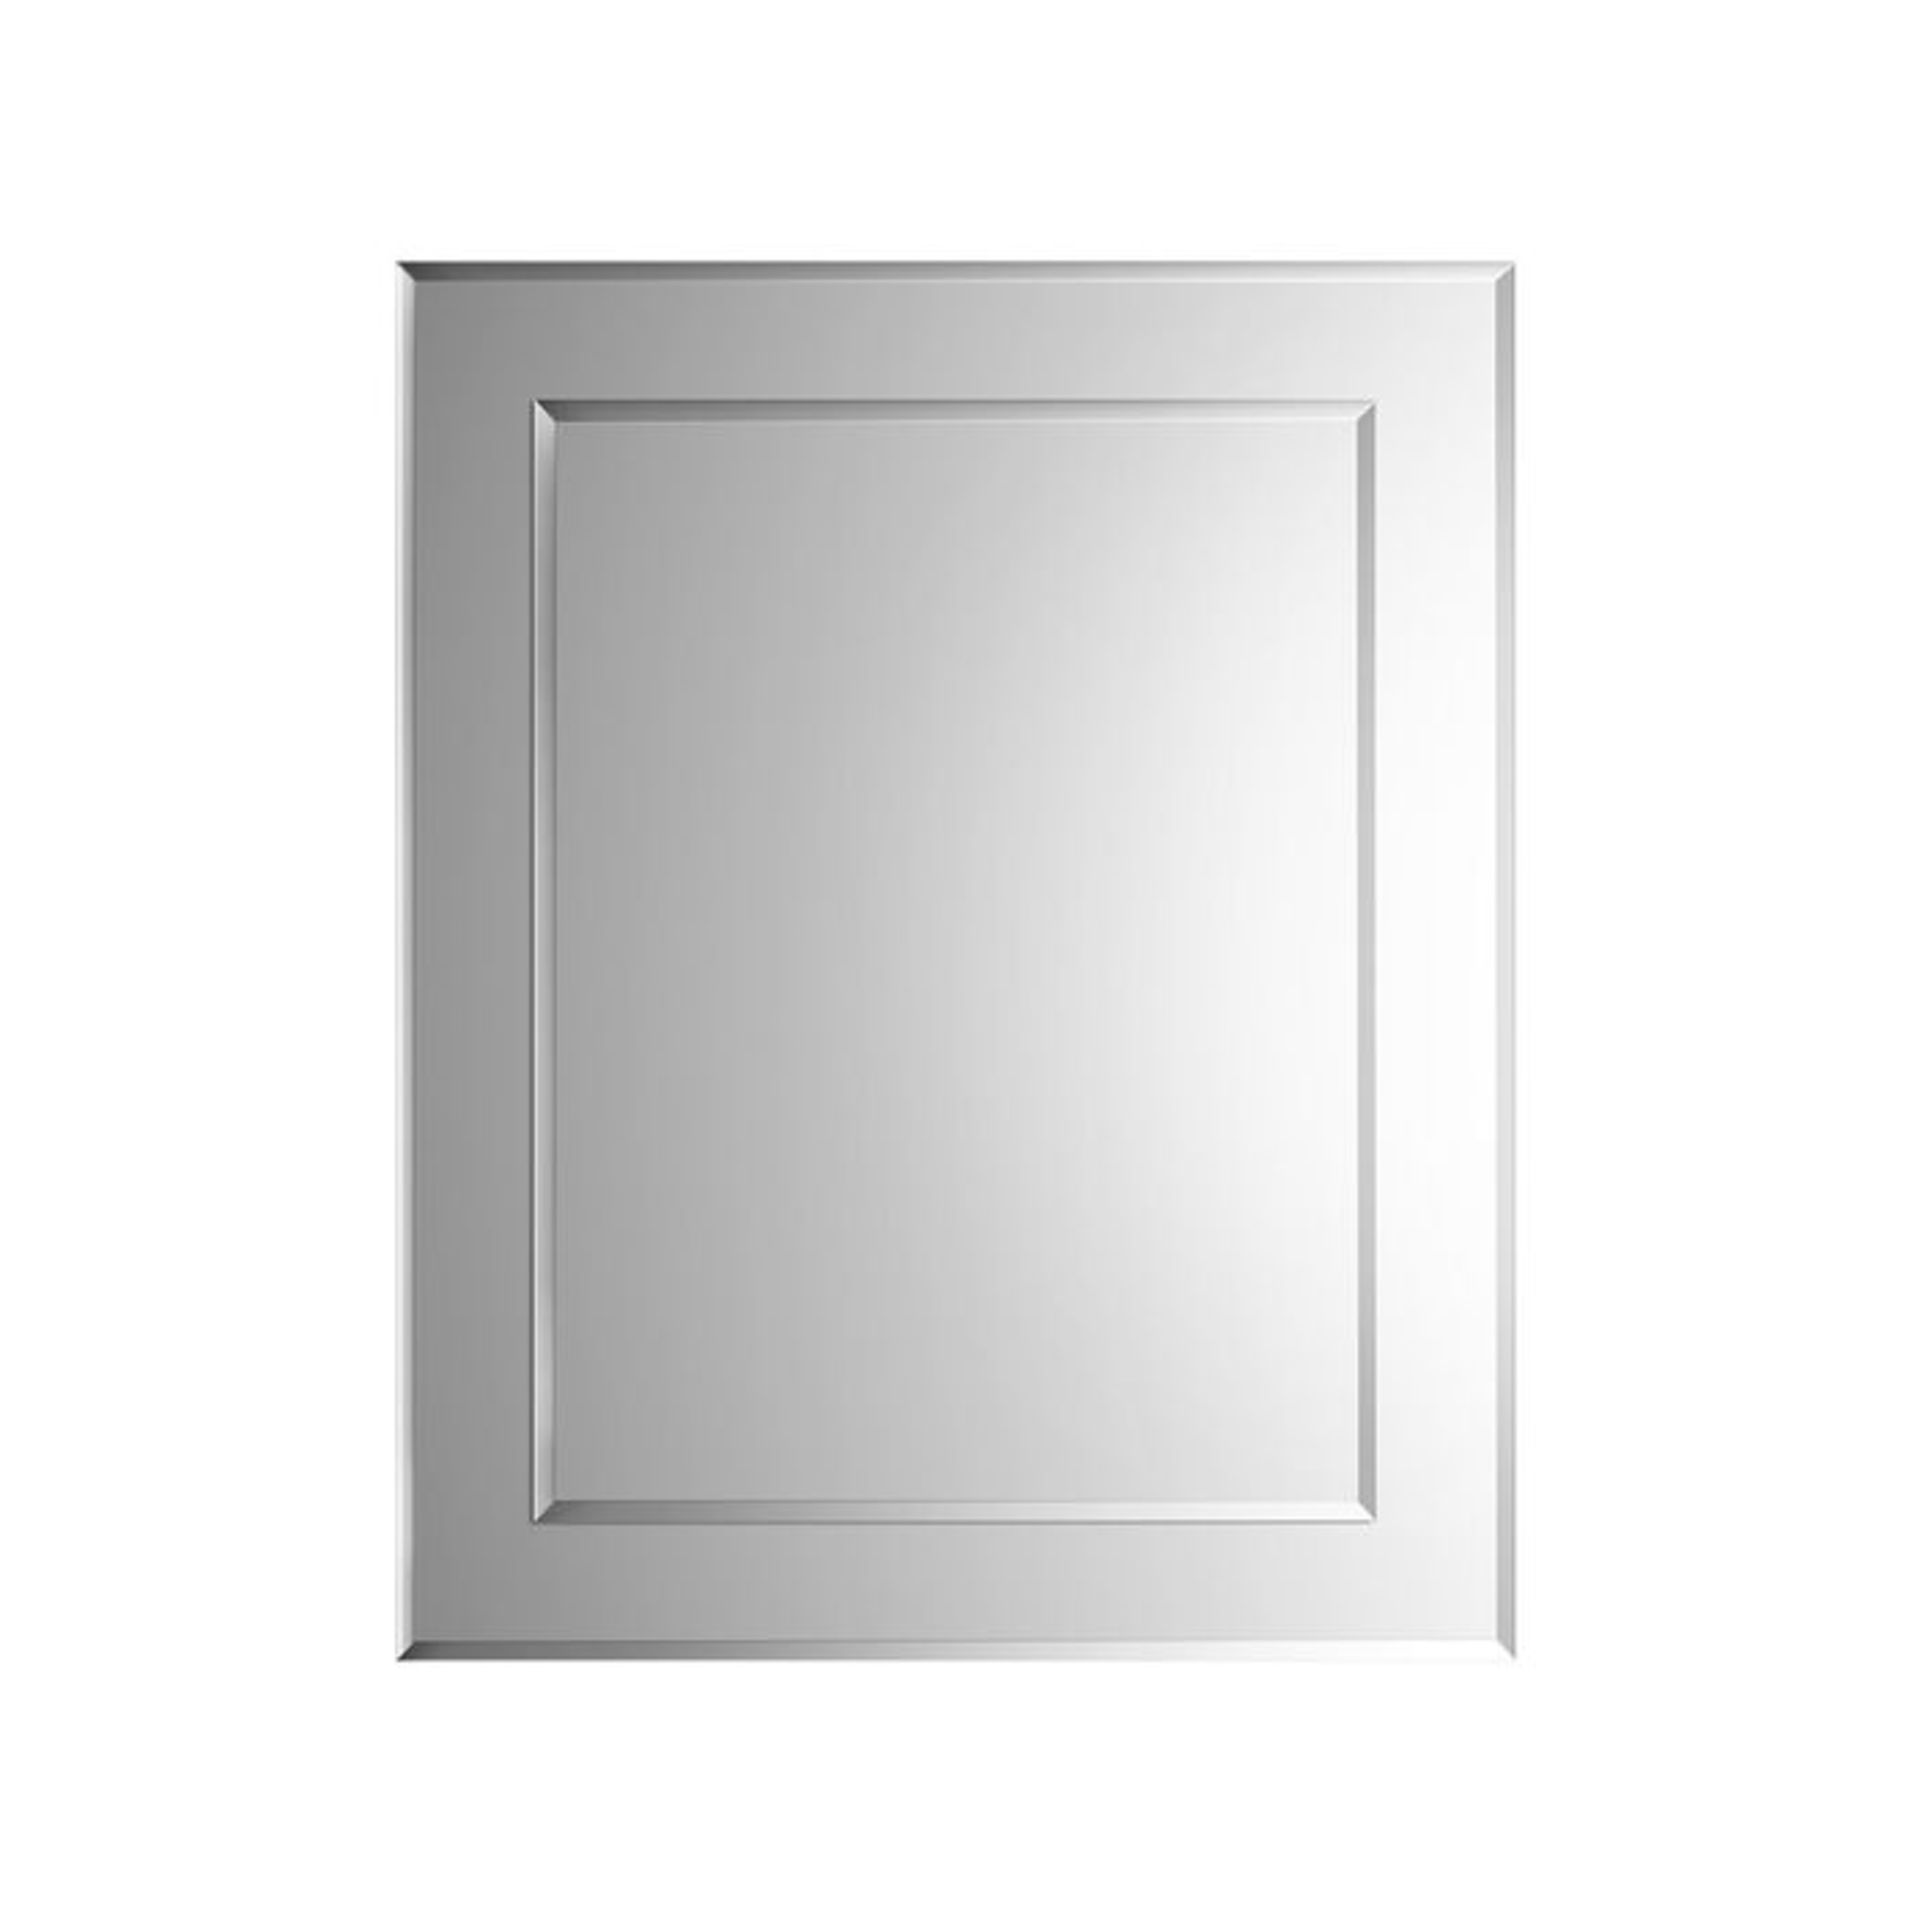 (RK198) 400x500mm Bevel Mirror. Our 400x500 Bevel Mirror offers a choice of horizontal or vert... - Image 2 of 2